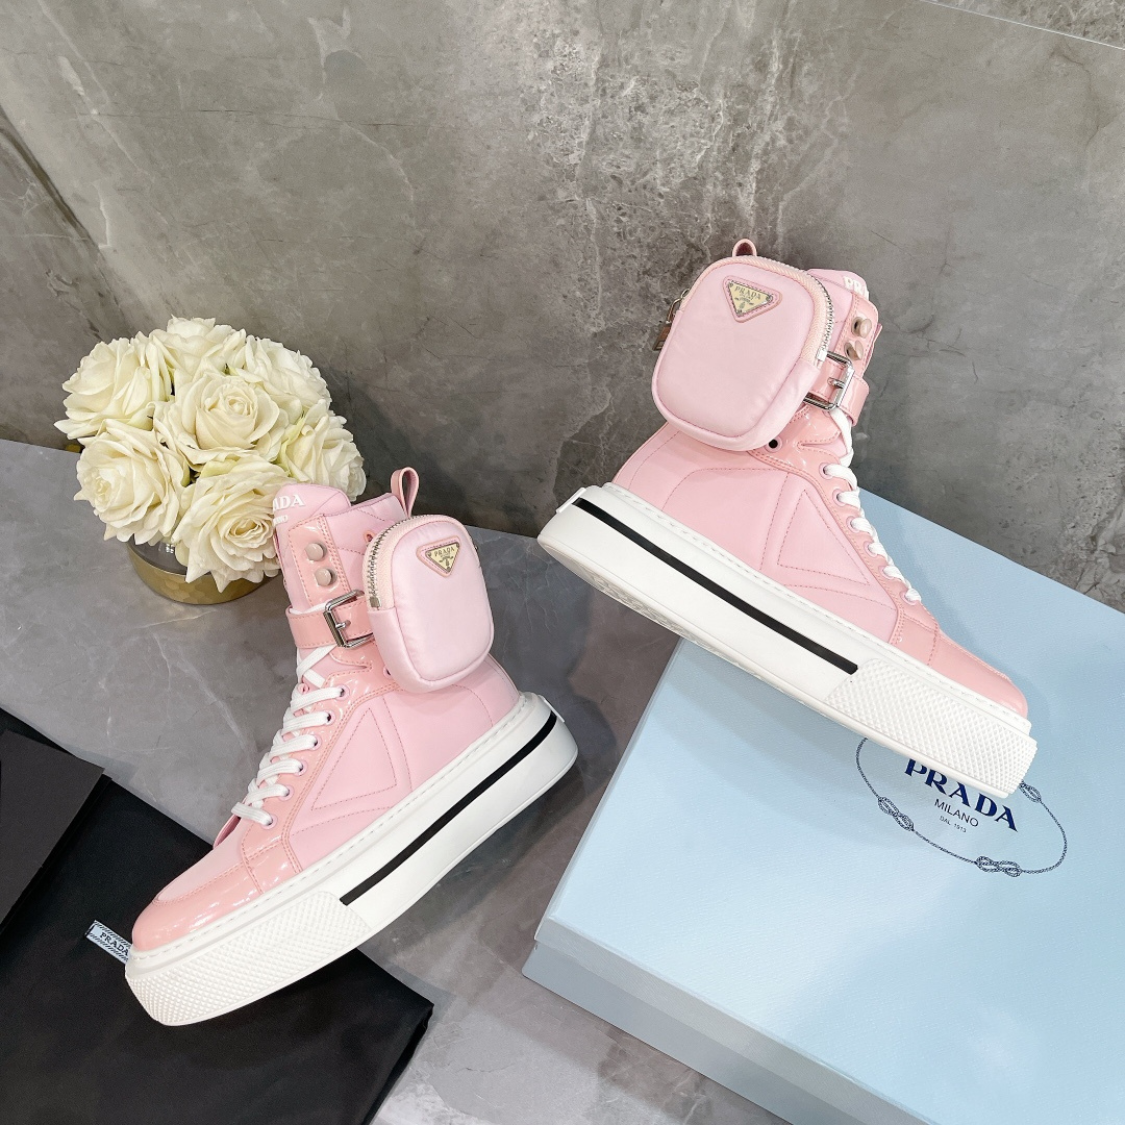 Luxurious Nylon High-Top Sneakers for Women - Pink